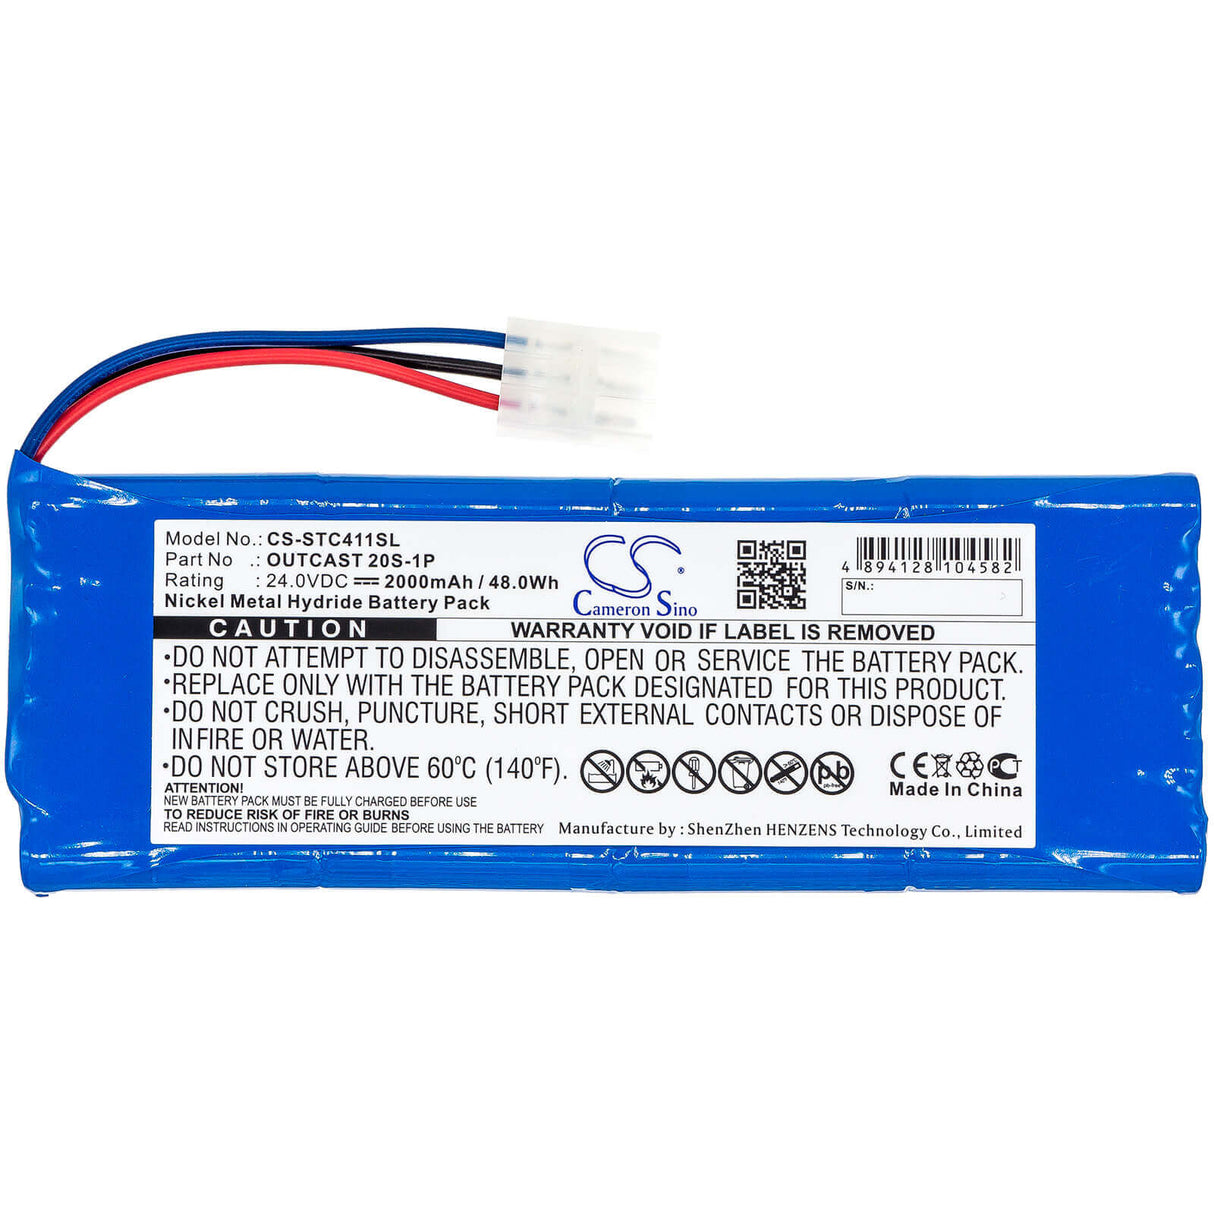 Battery For Soundcast Outcast Ico 421, Ico411a, Ico410, Ico411a-4n 24.0v, 2000mah - 48.00wh Batteries for Electronics Cameron Sino Technology Limited   